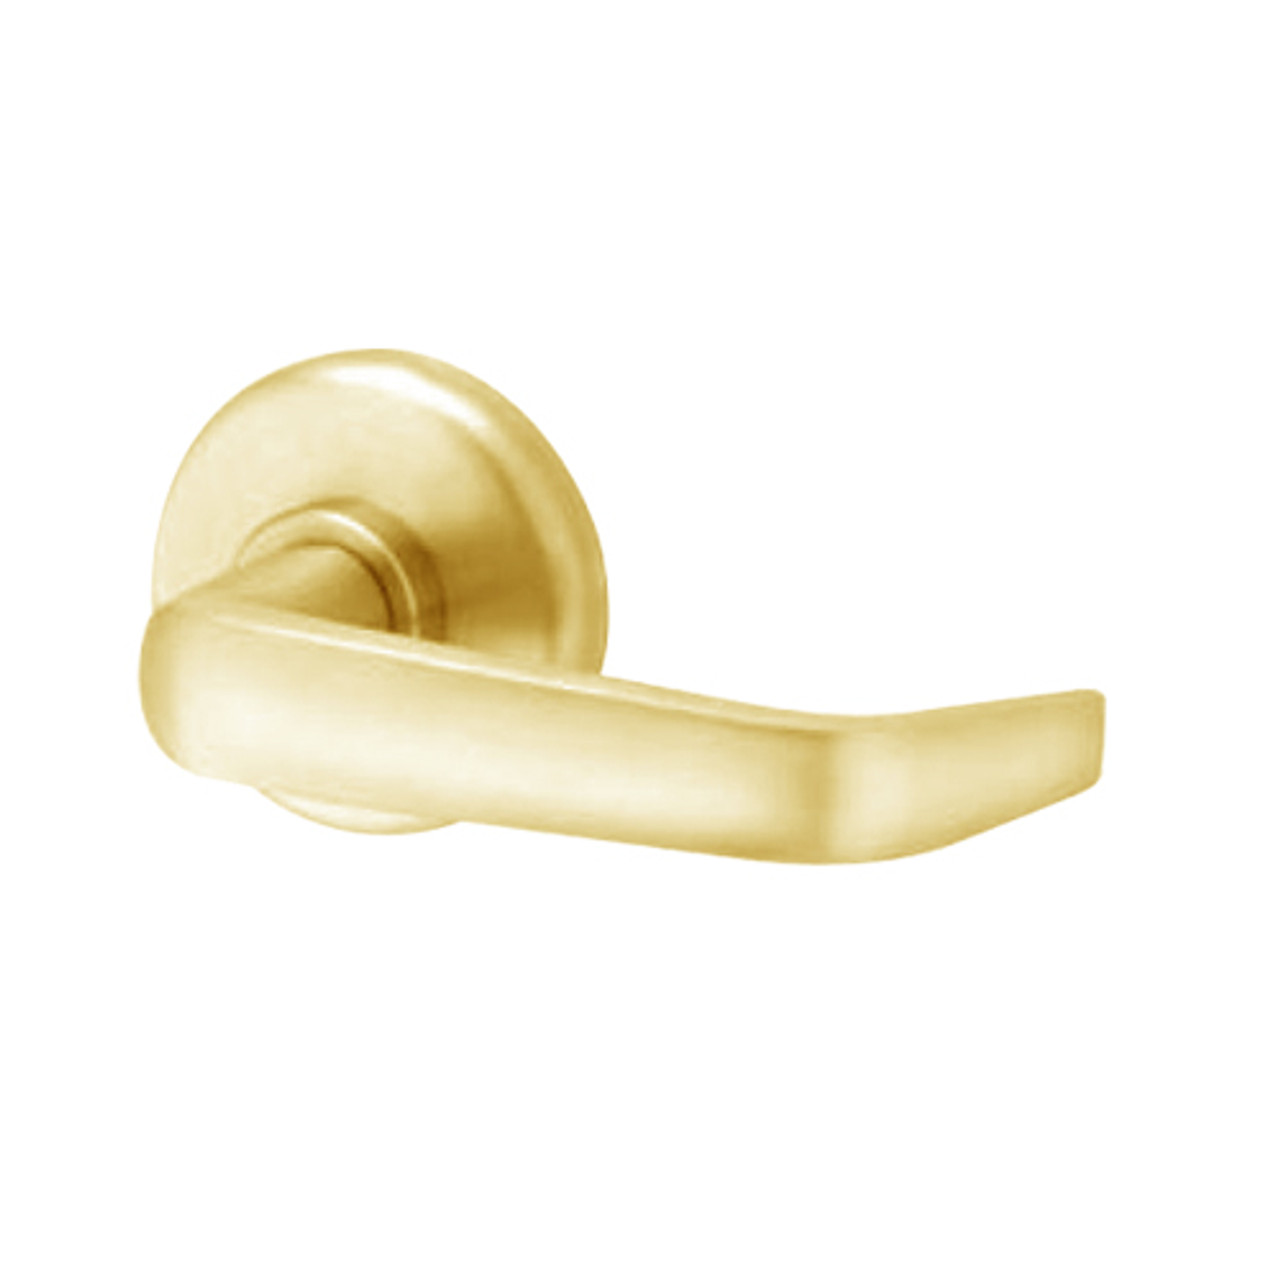 40HTKIS315S605 Best 40H Series Trim Kits Inside Lever w/ Cylinder with Contour w/ Angle Return Style in Bright Brass